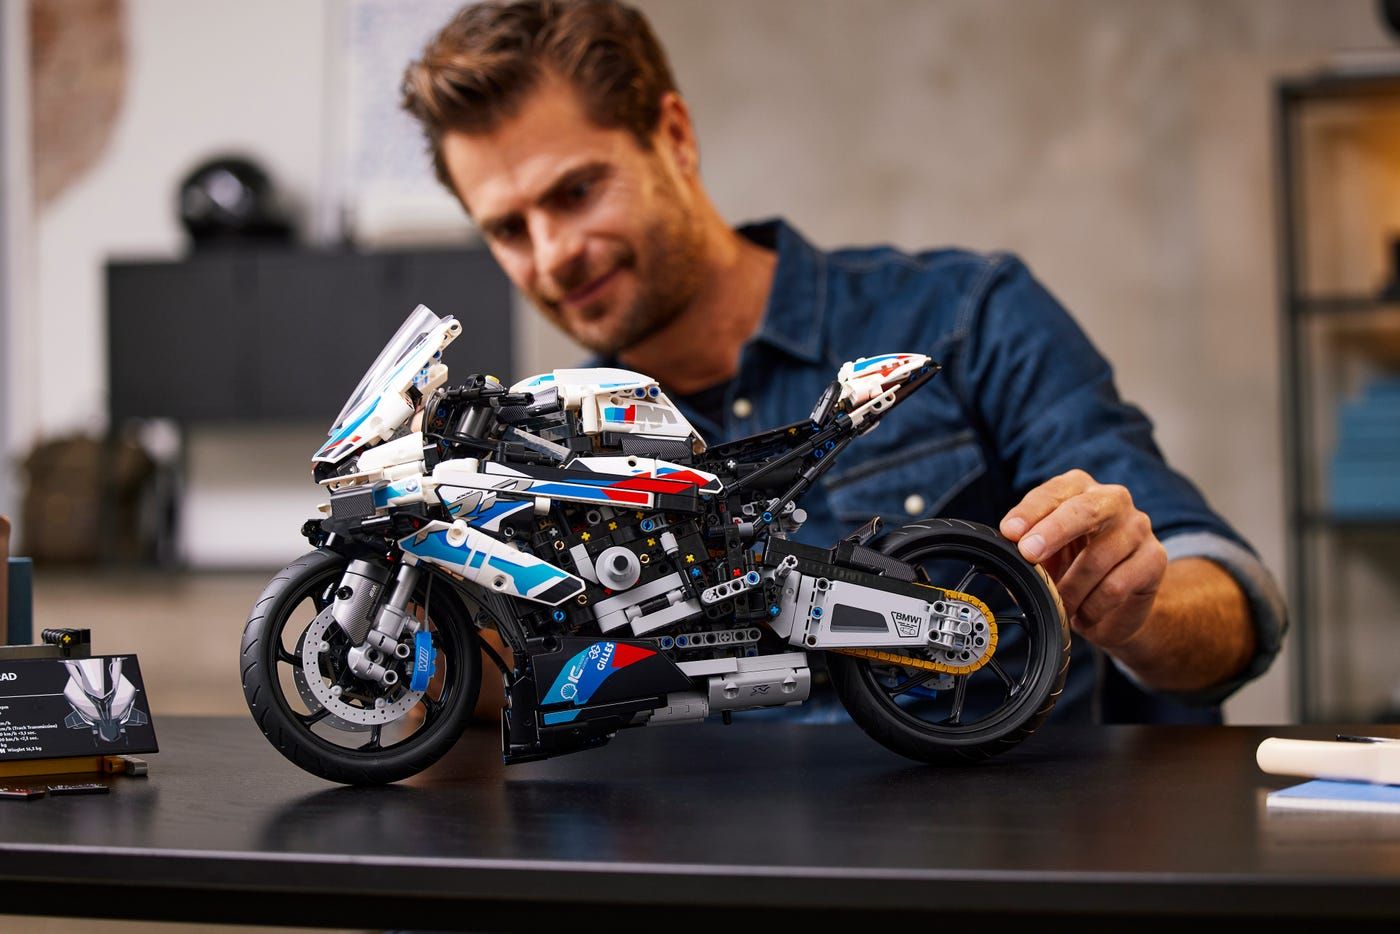 Tested: Lego's New BMW M 1000 RR, Plus Thoughts from the Designer